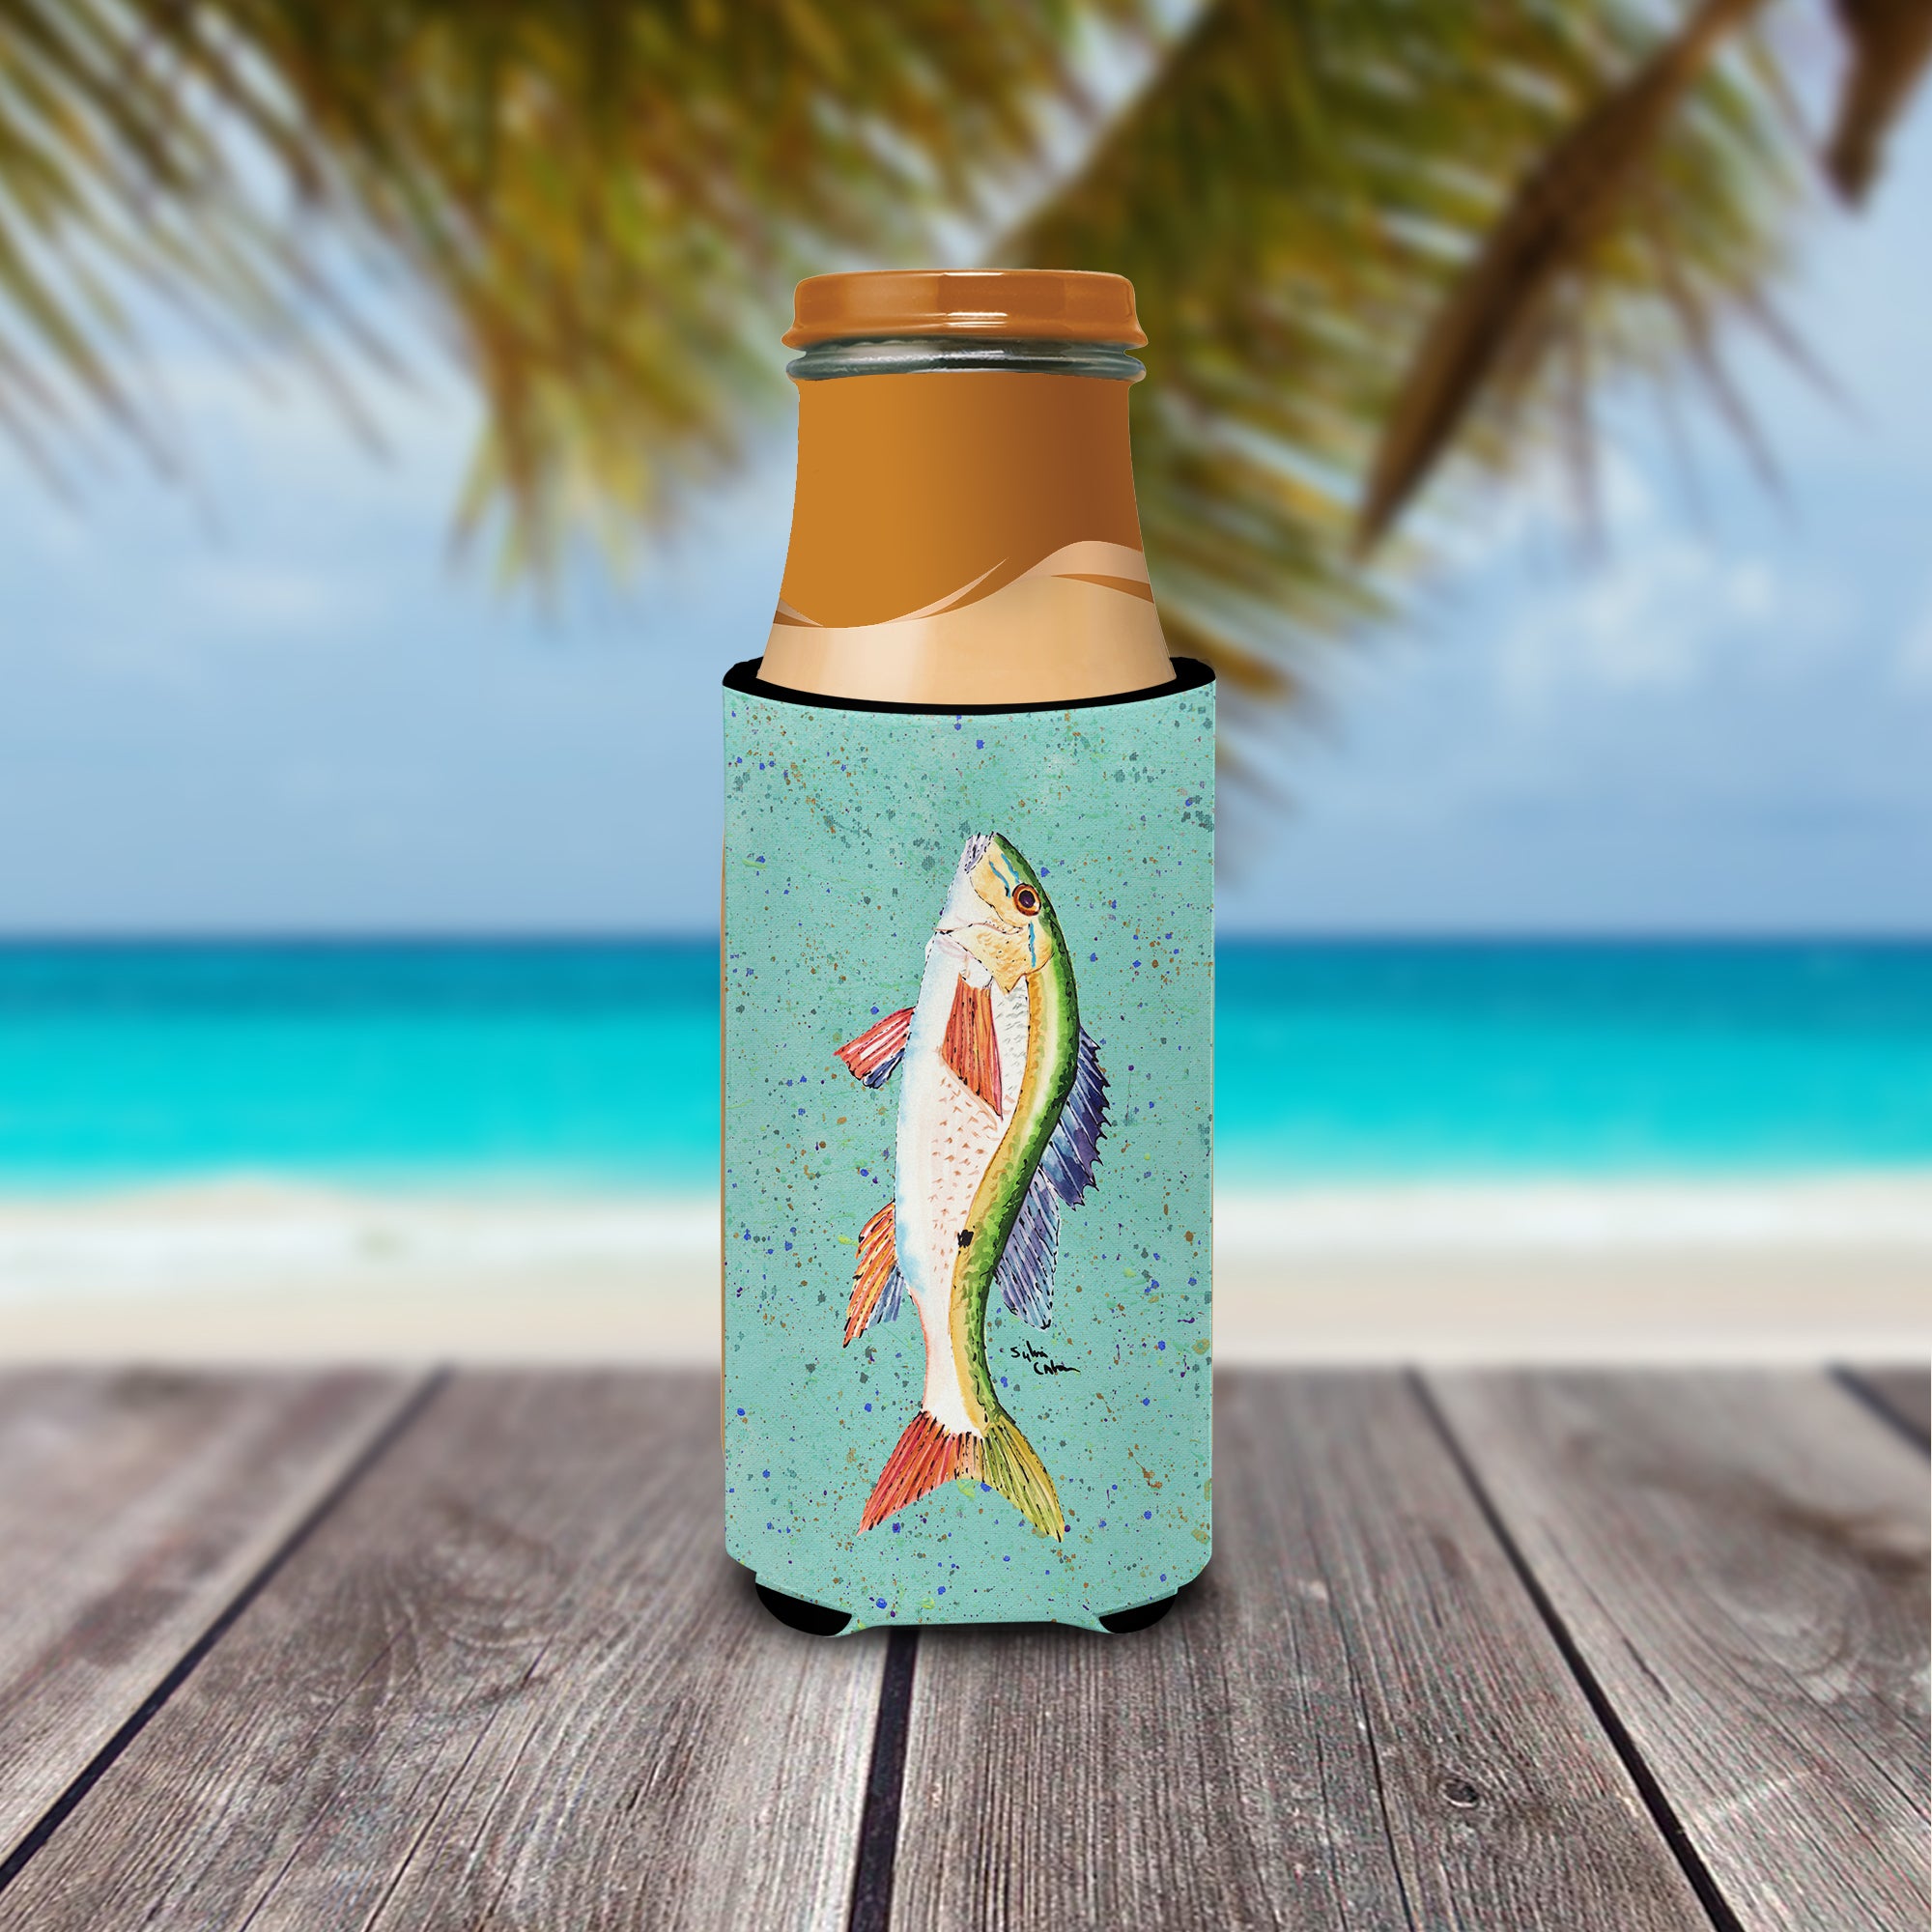 Fish Mutton Snapper Ultra Beverage Insulators for slim cans 8355MUK.